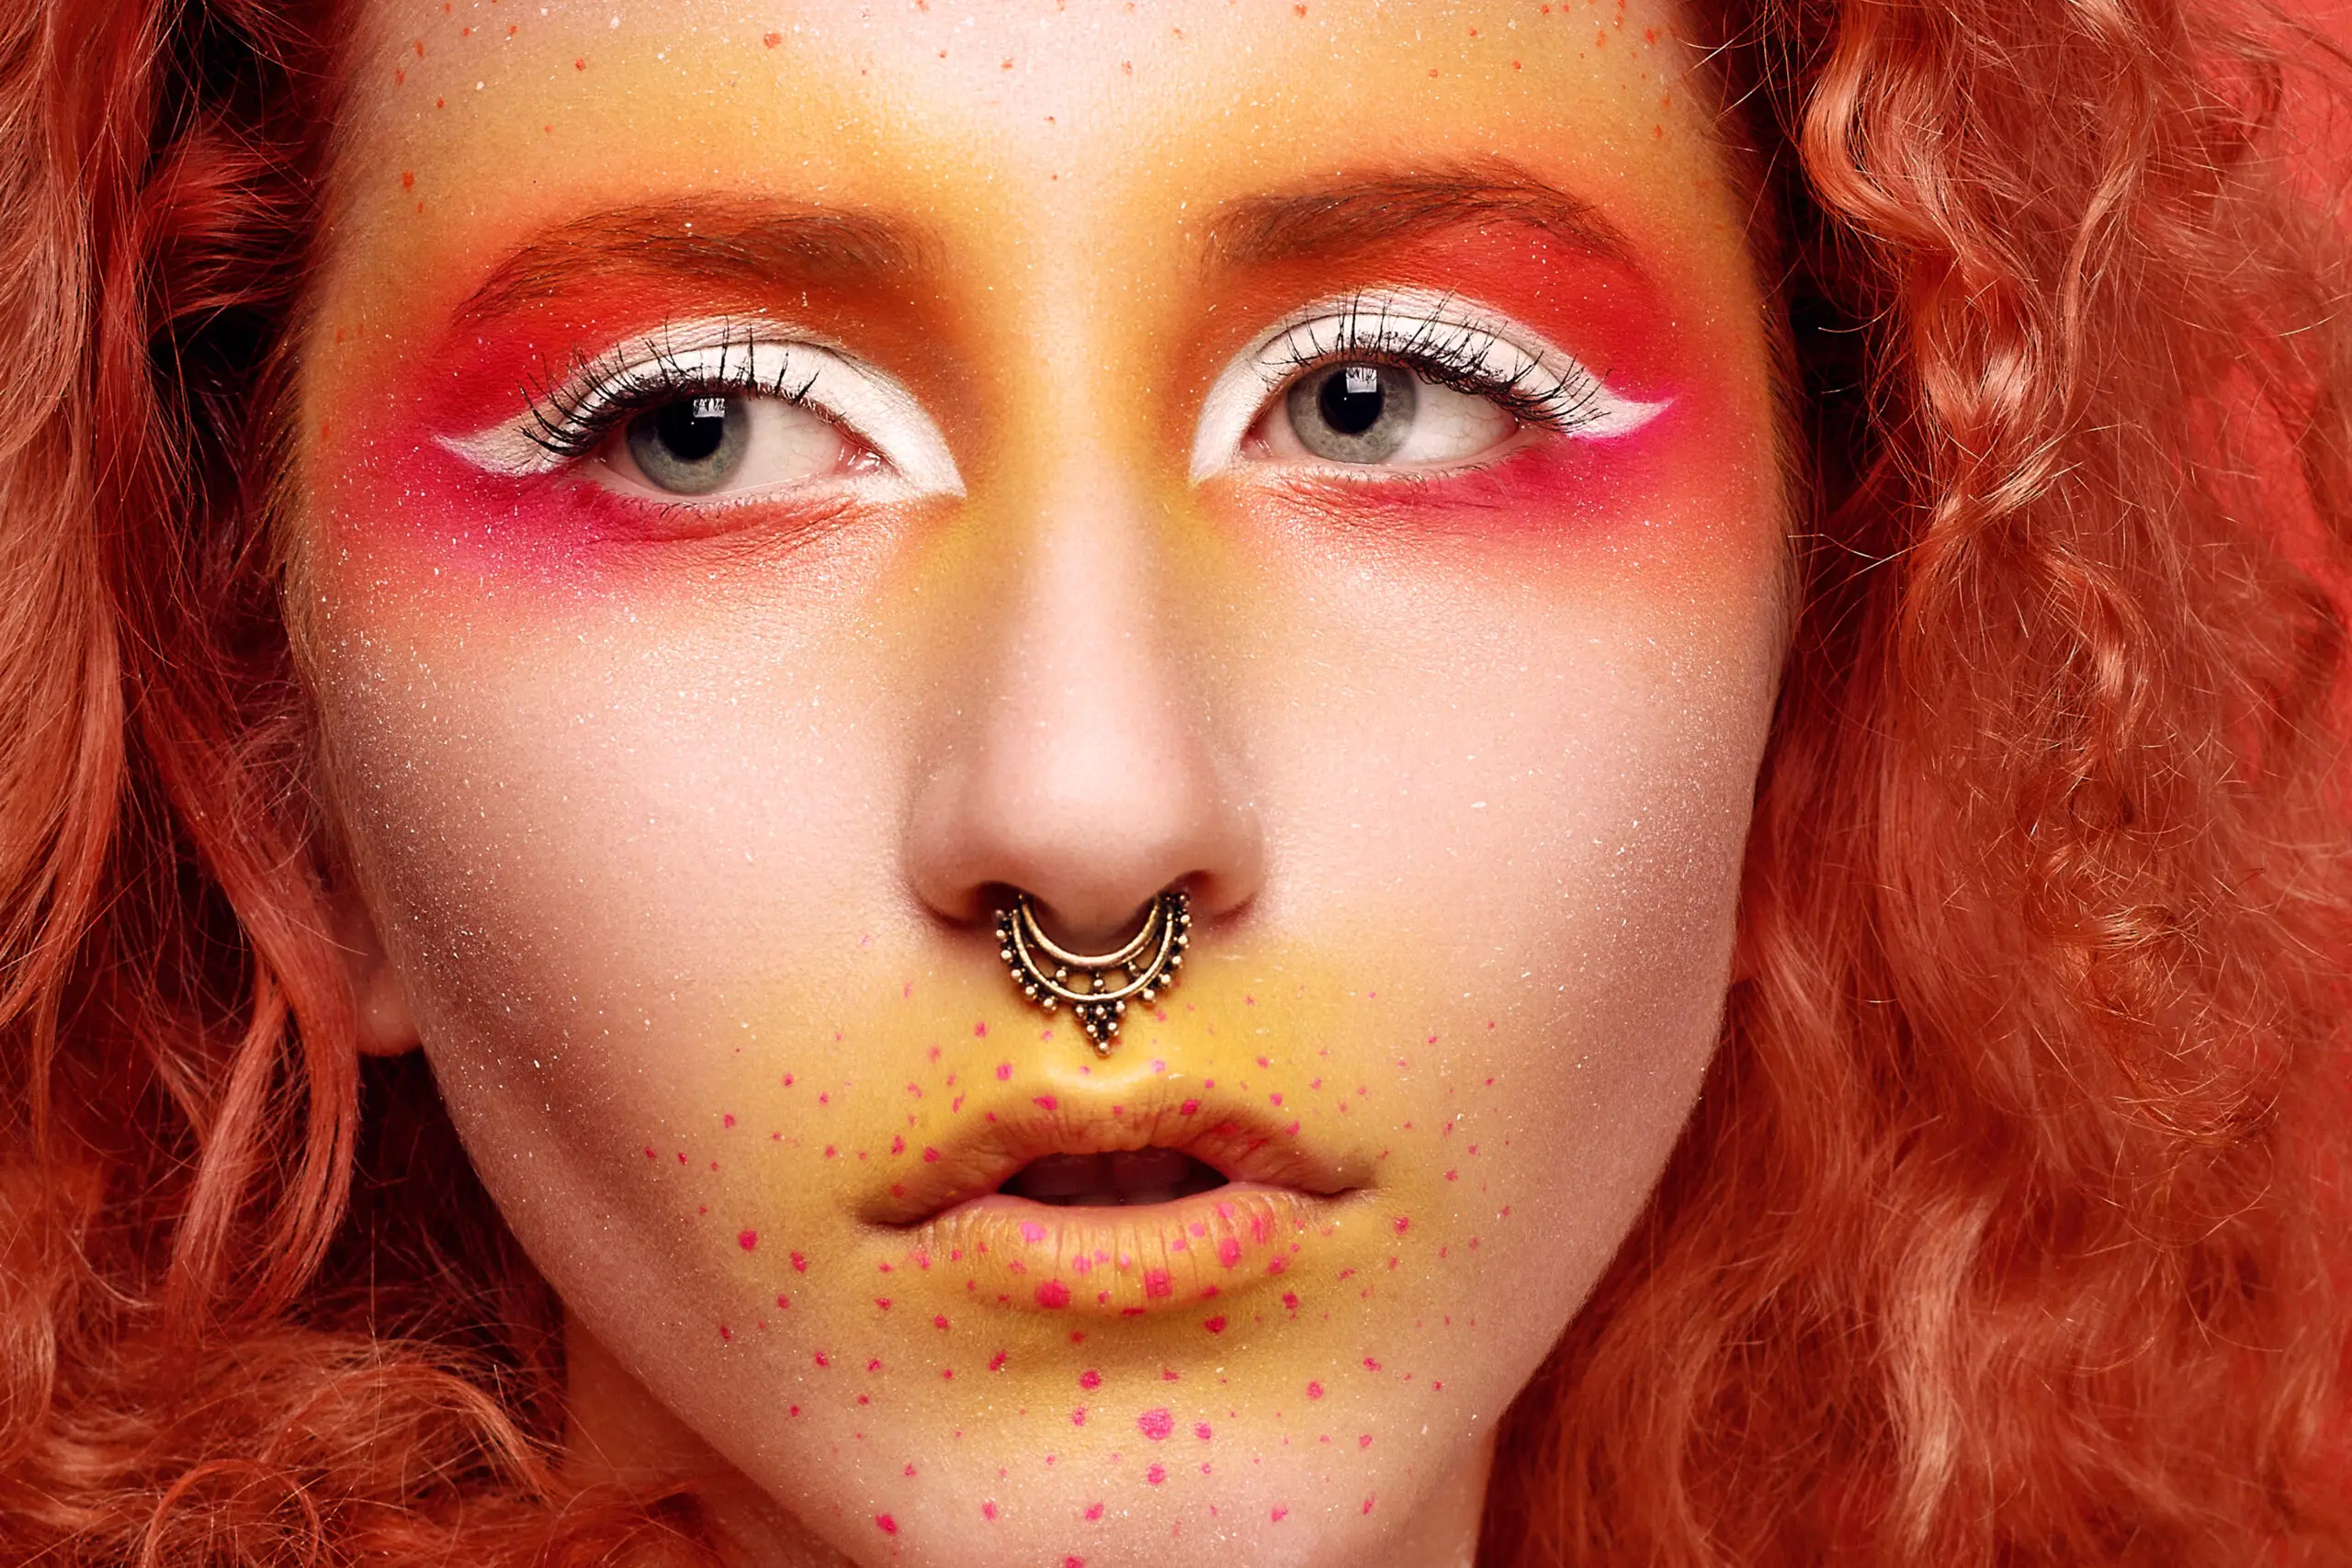 girl with septum piercings and red hair, artistic makeup portrait